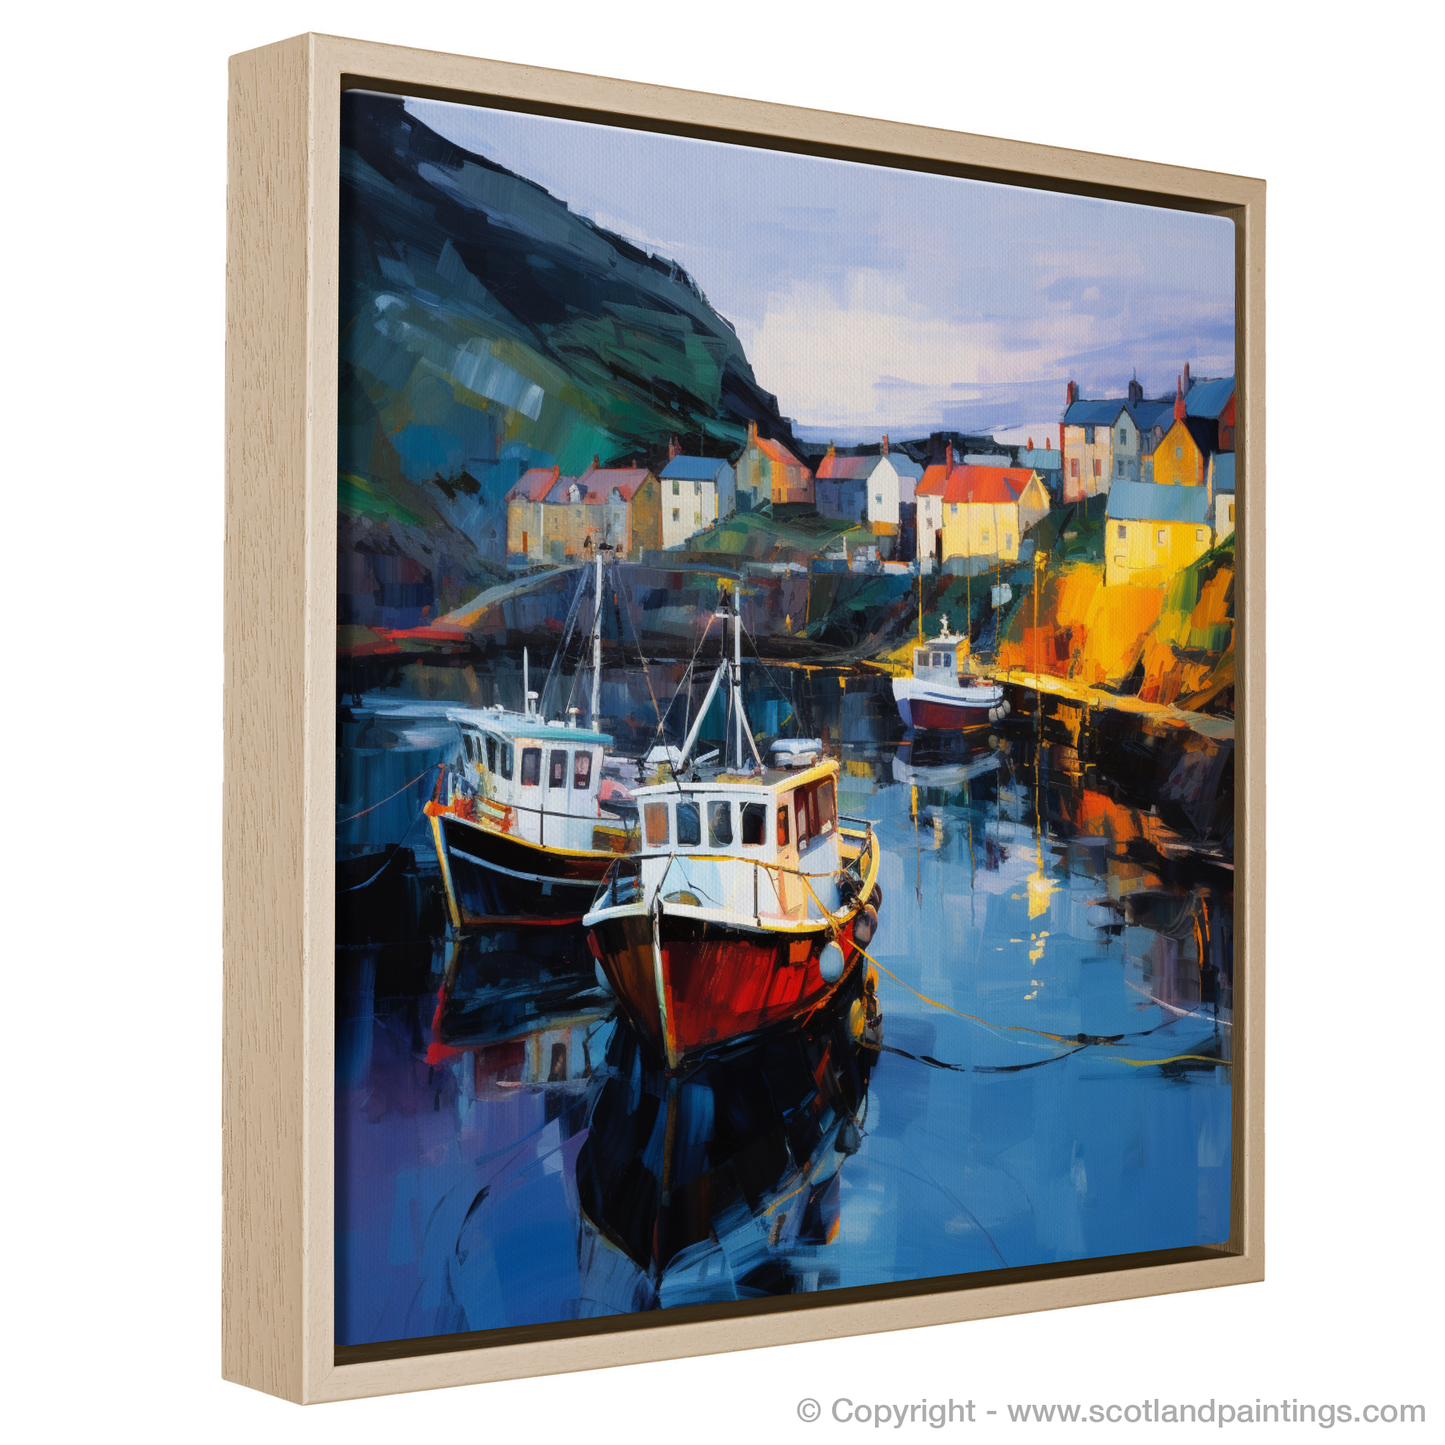 Painting and Art Print of Gardenstown Harbour at dusk entitled "Dusk at Gardenstown Harbour: An Expressionist Ode to Scottish Coastal Beauty".